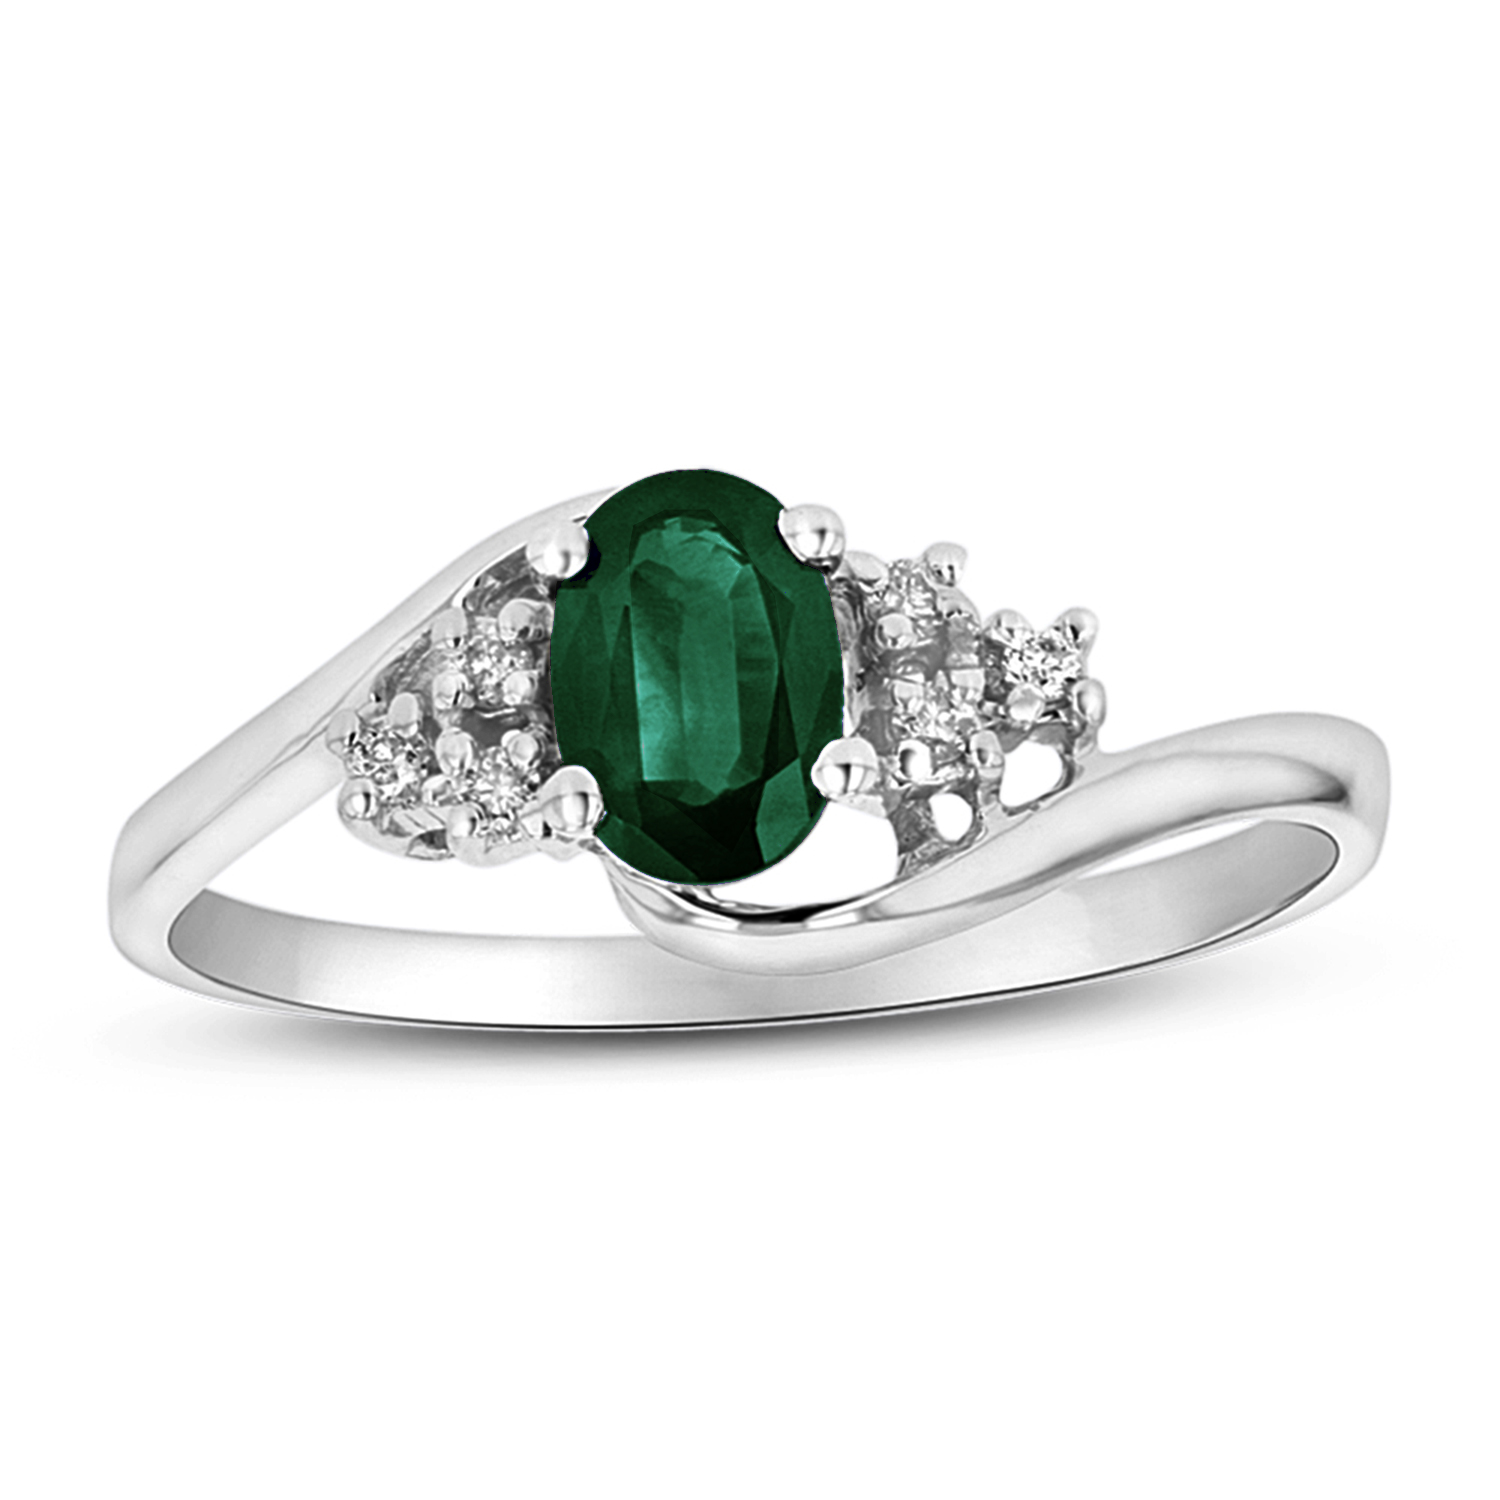 0.44cttw Emerald and Diamond Fashion Ring set in 14k Gold